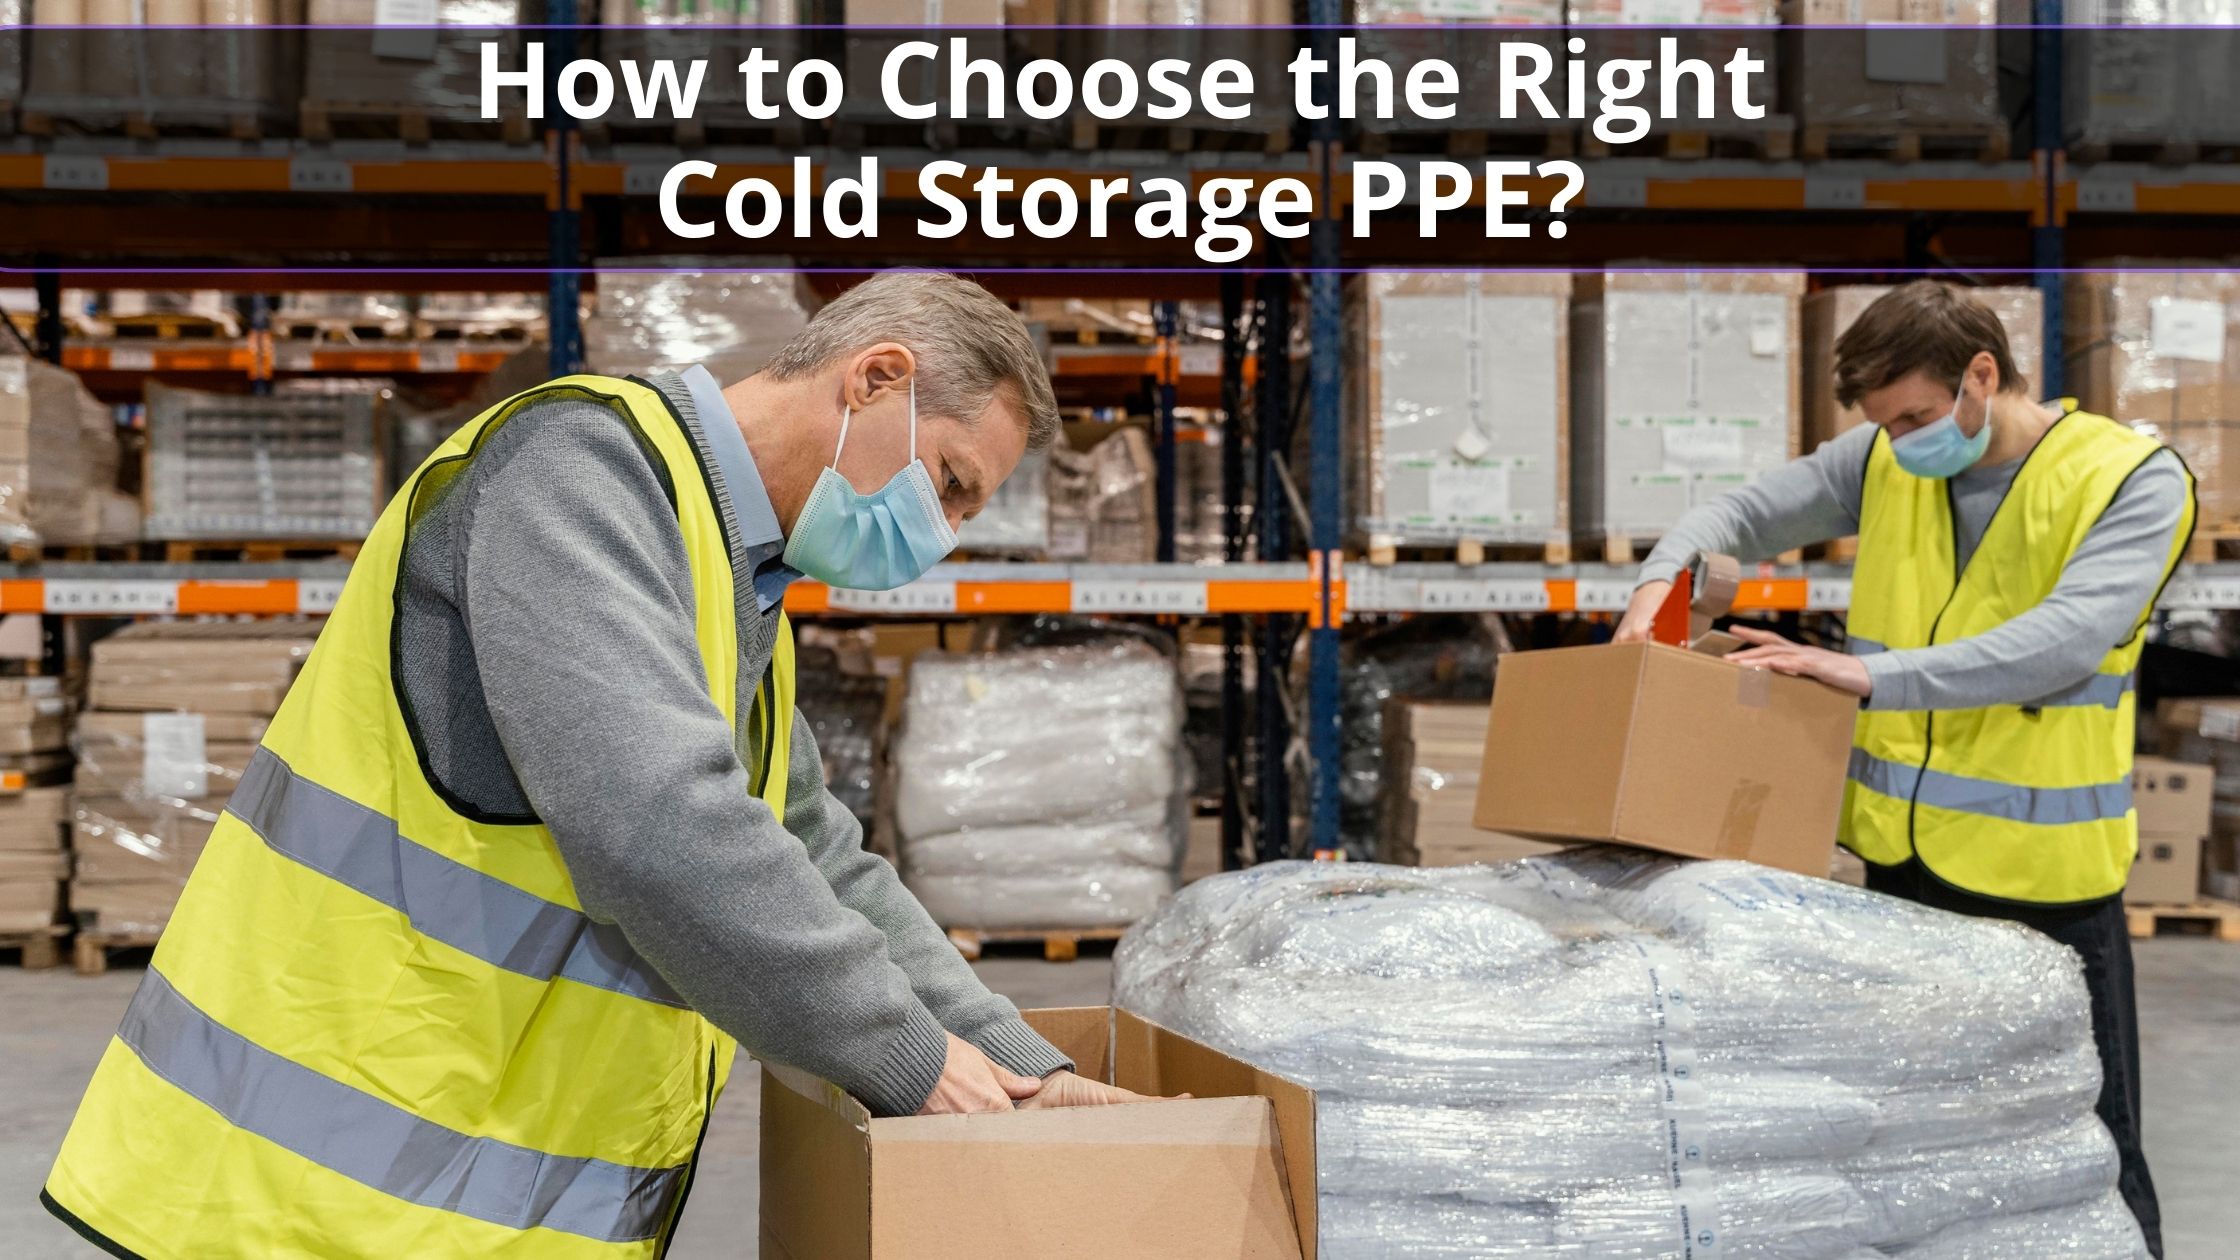 How to Choose the Right Cold Storage PPE?